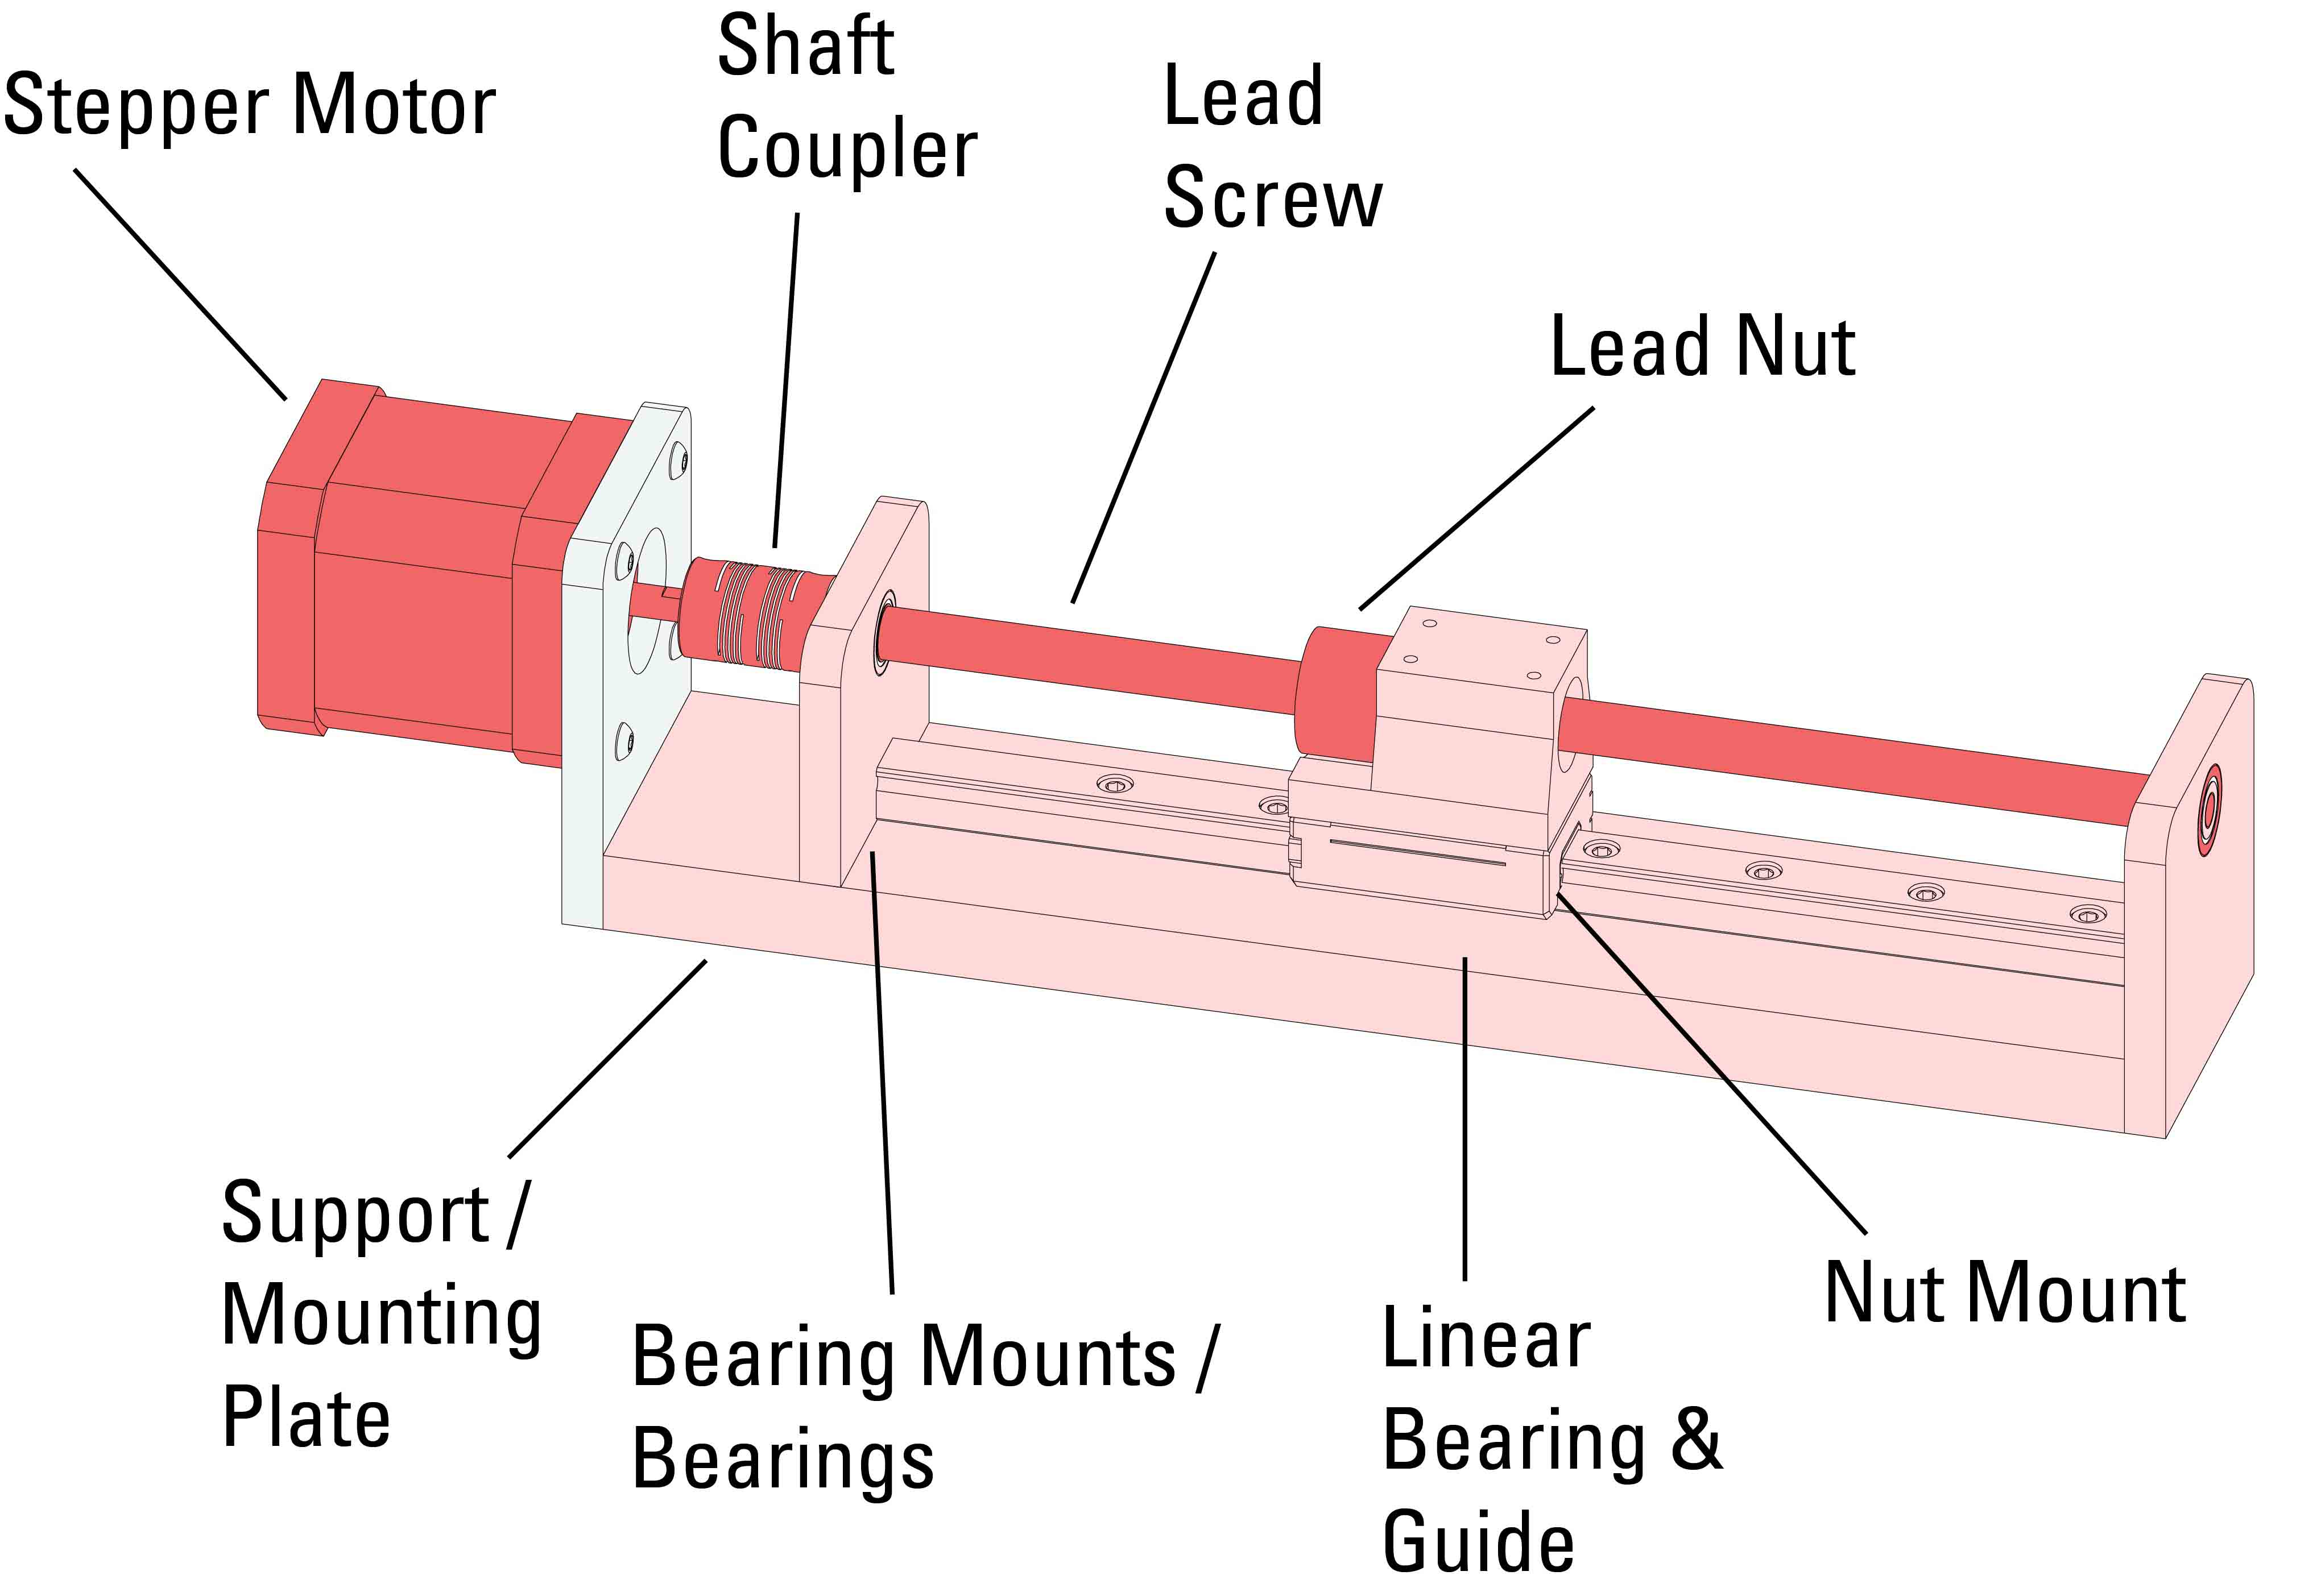 Linear Motion and Coupled Systems